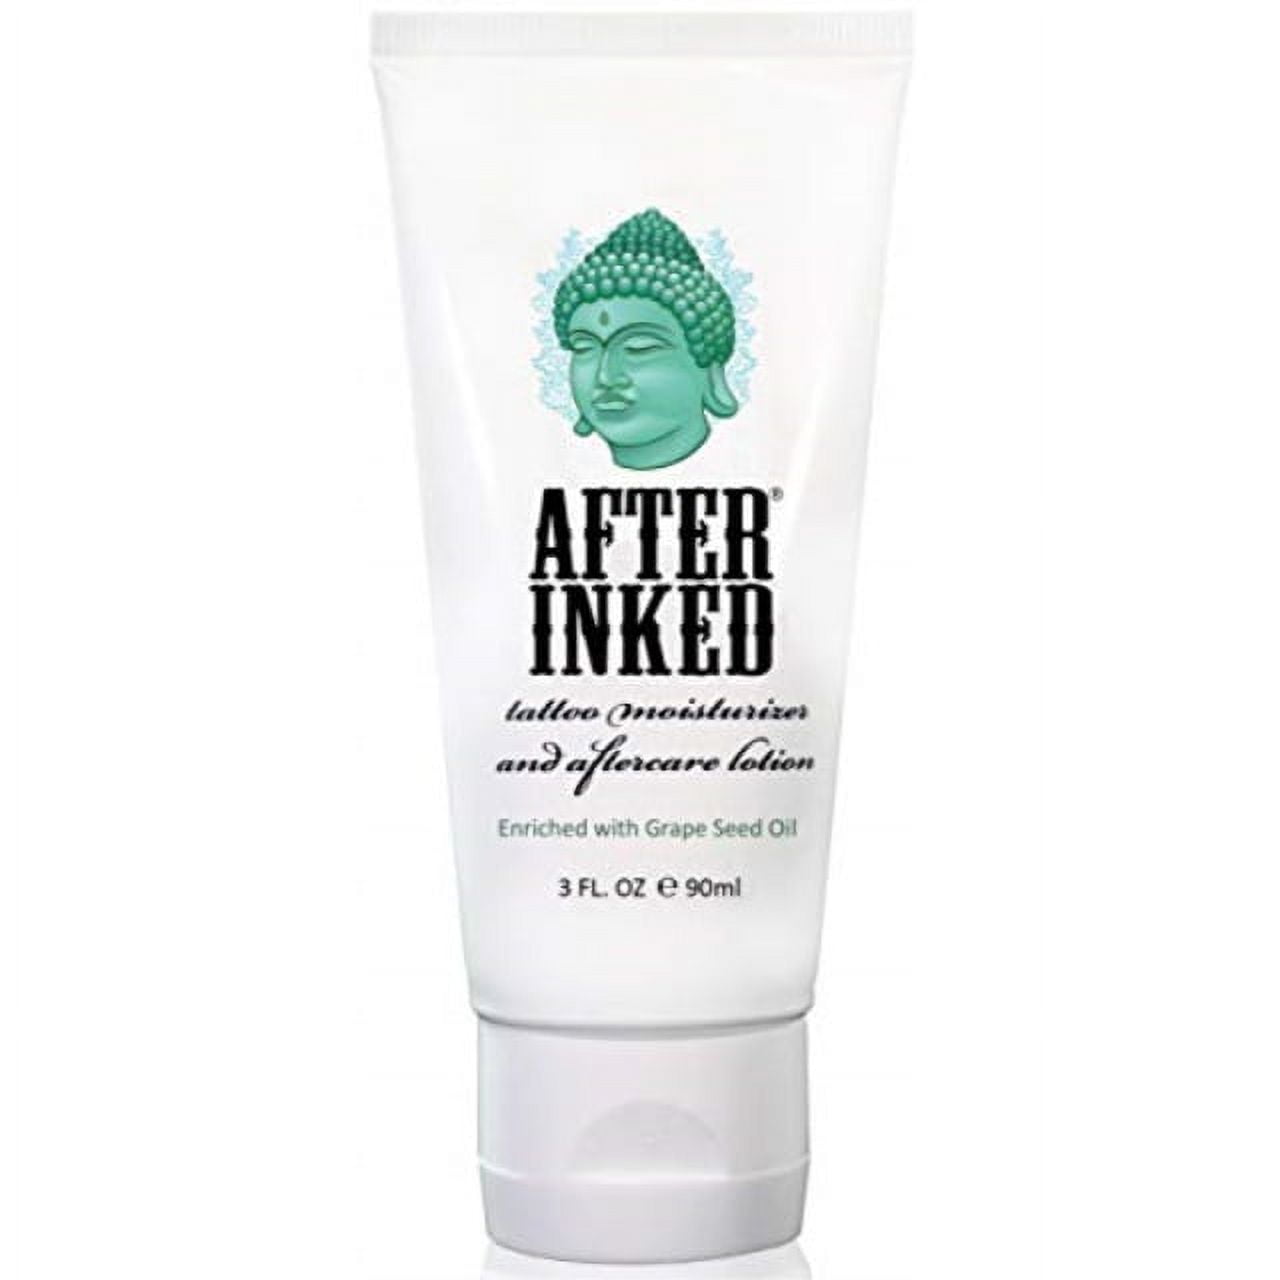 Tattoo Goo Aftercare Kit Includes Antimicrobial Soap, Balm, and Lotion,  Tattoo Care for Color Enhancement + Quick Healing - Vegan, Cruelty-Free